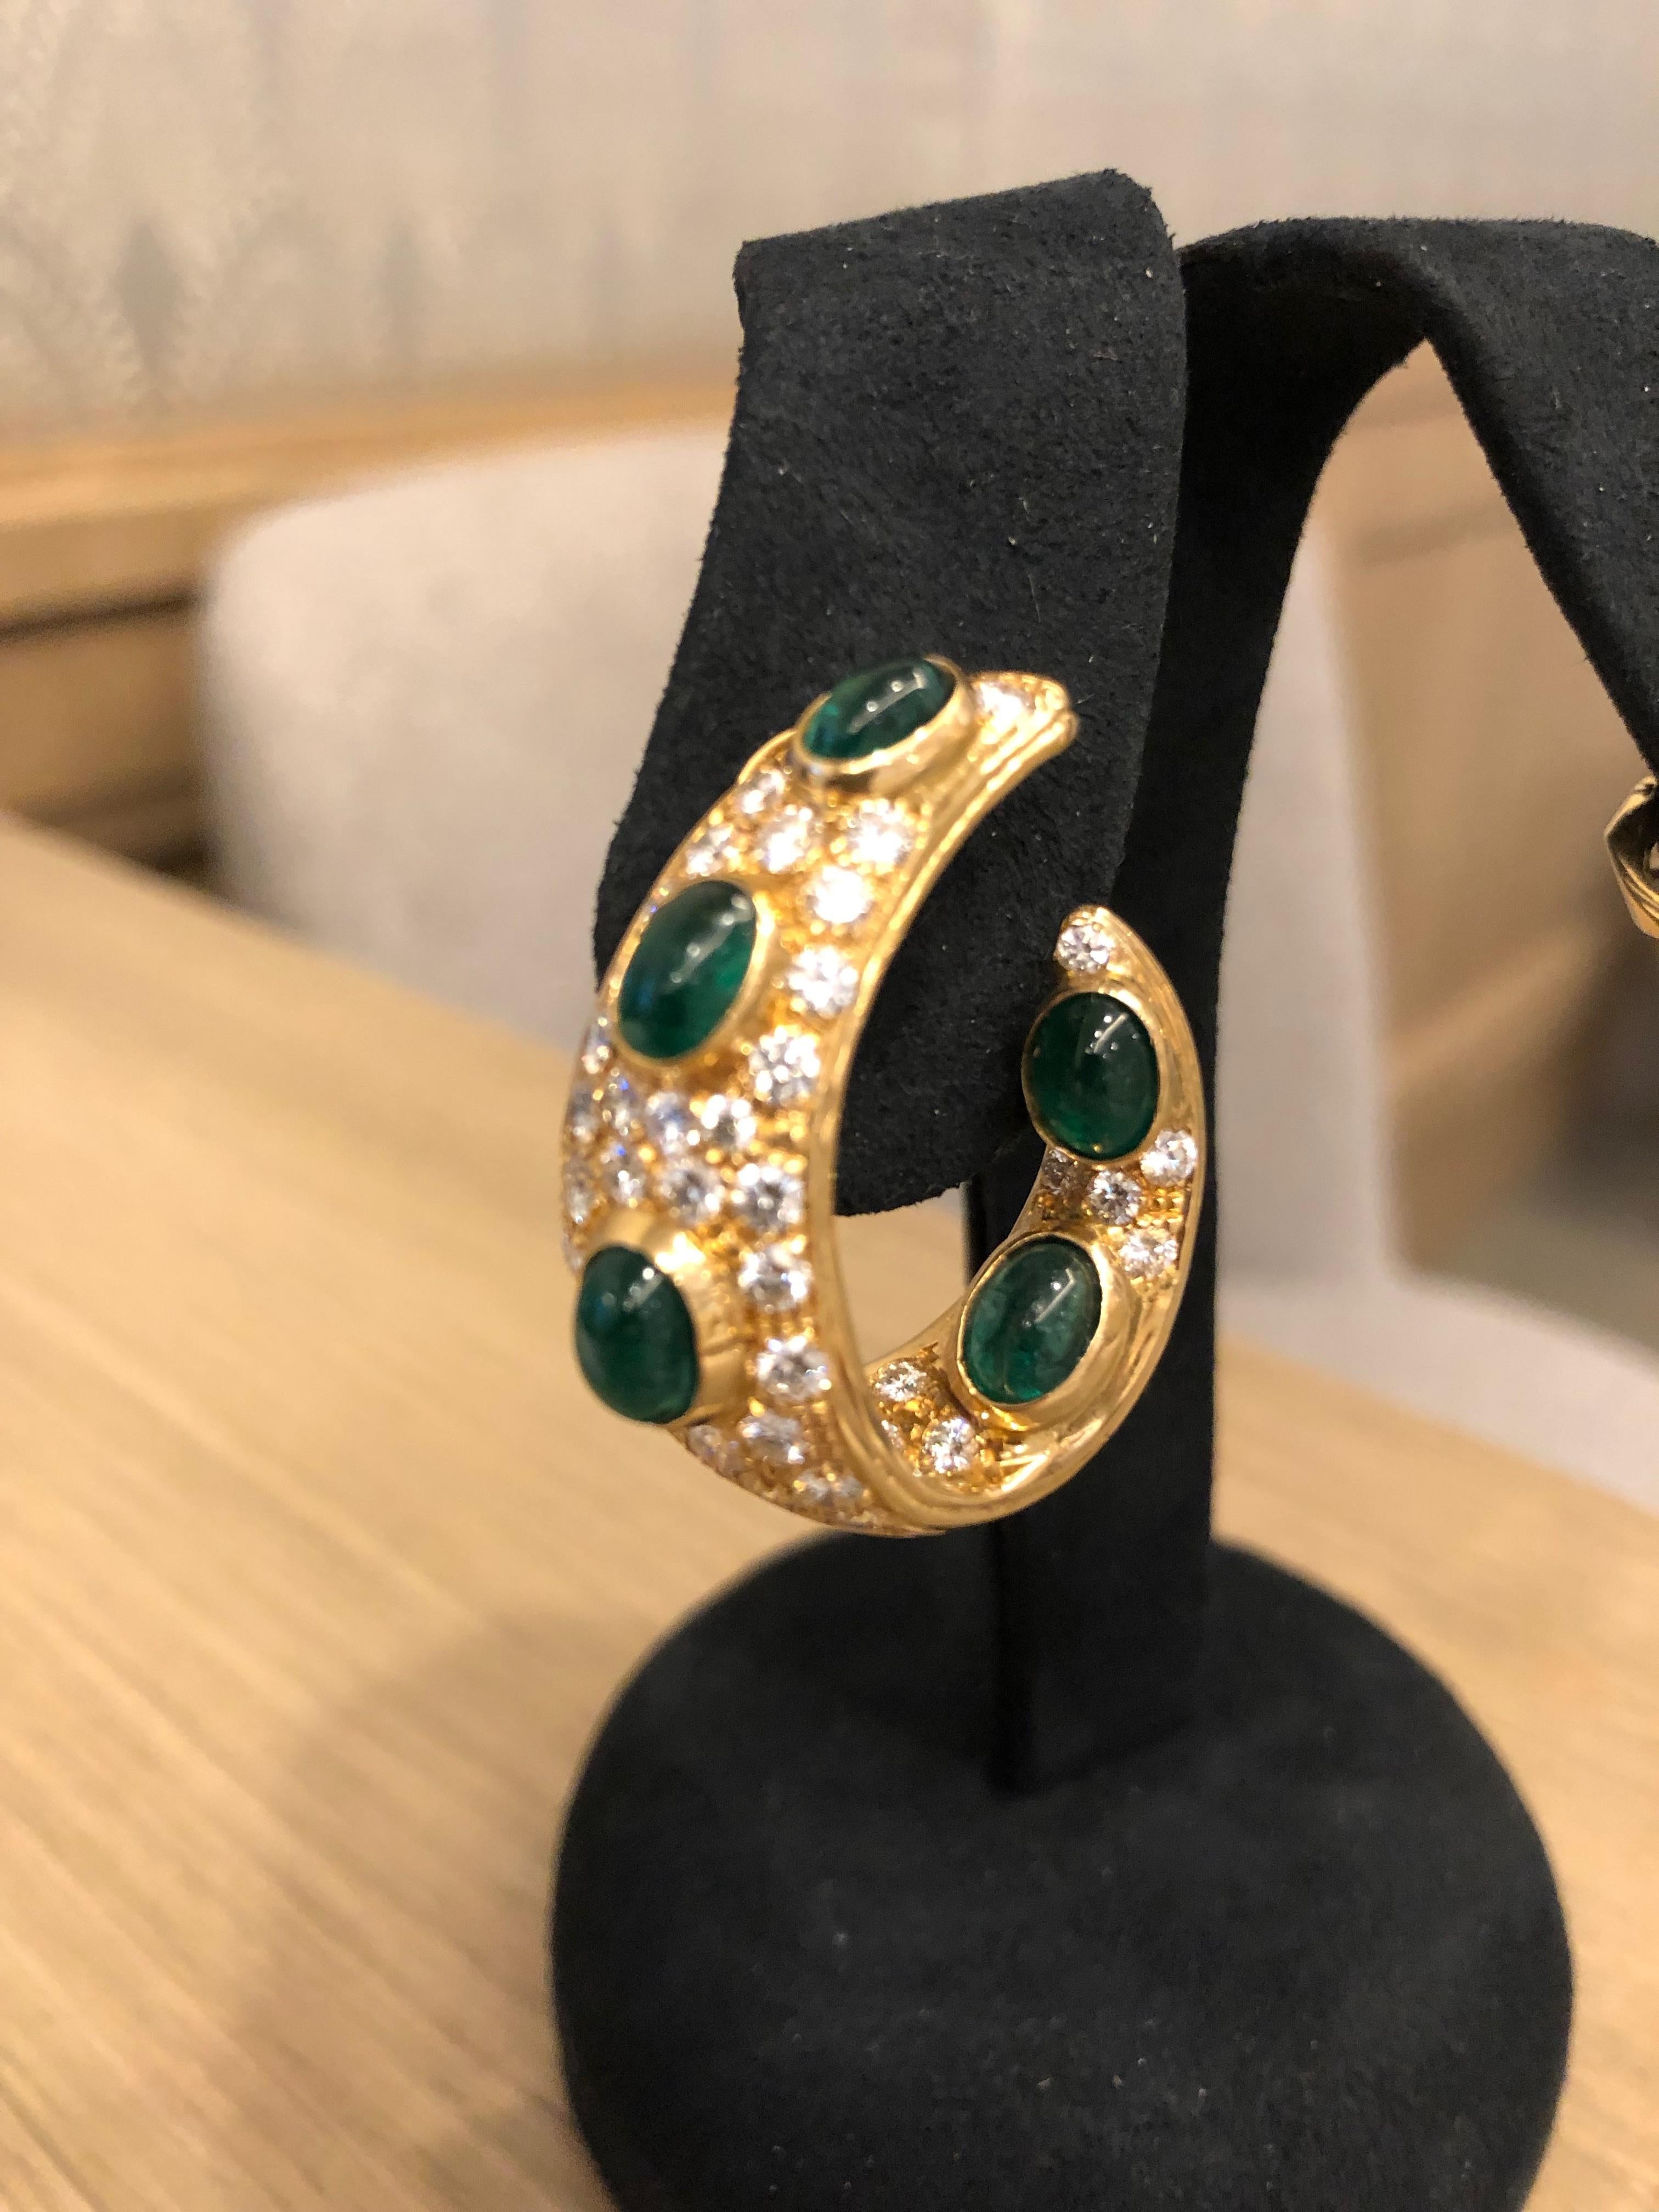 A pair of British Early 21st-Century 18 karat gold earrings with diamonds and emeralds by Graff. The compressed gold hoops feature 10 cabochon emeralds with an approximate total weight of 5.8 carats and are studded with an additional 78 VS clarity,